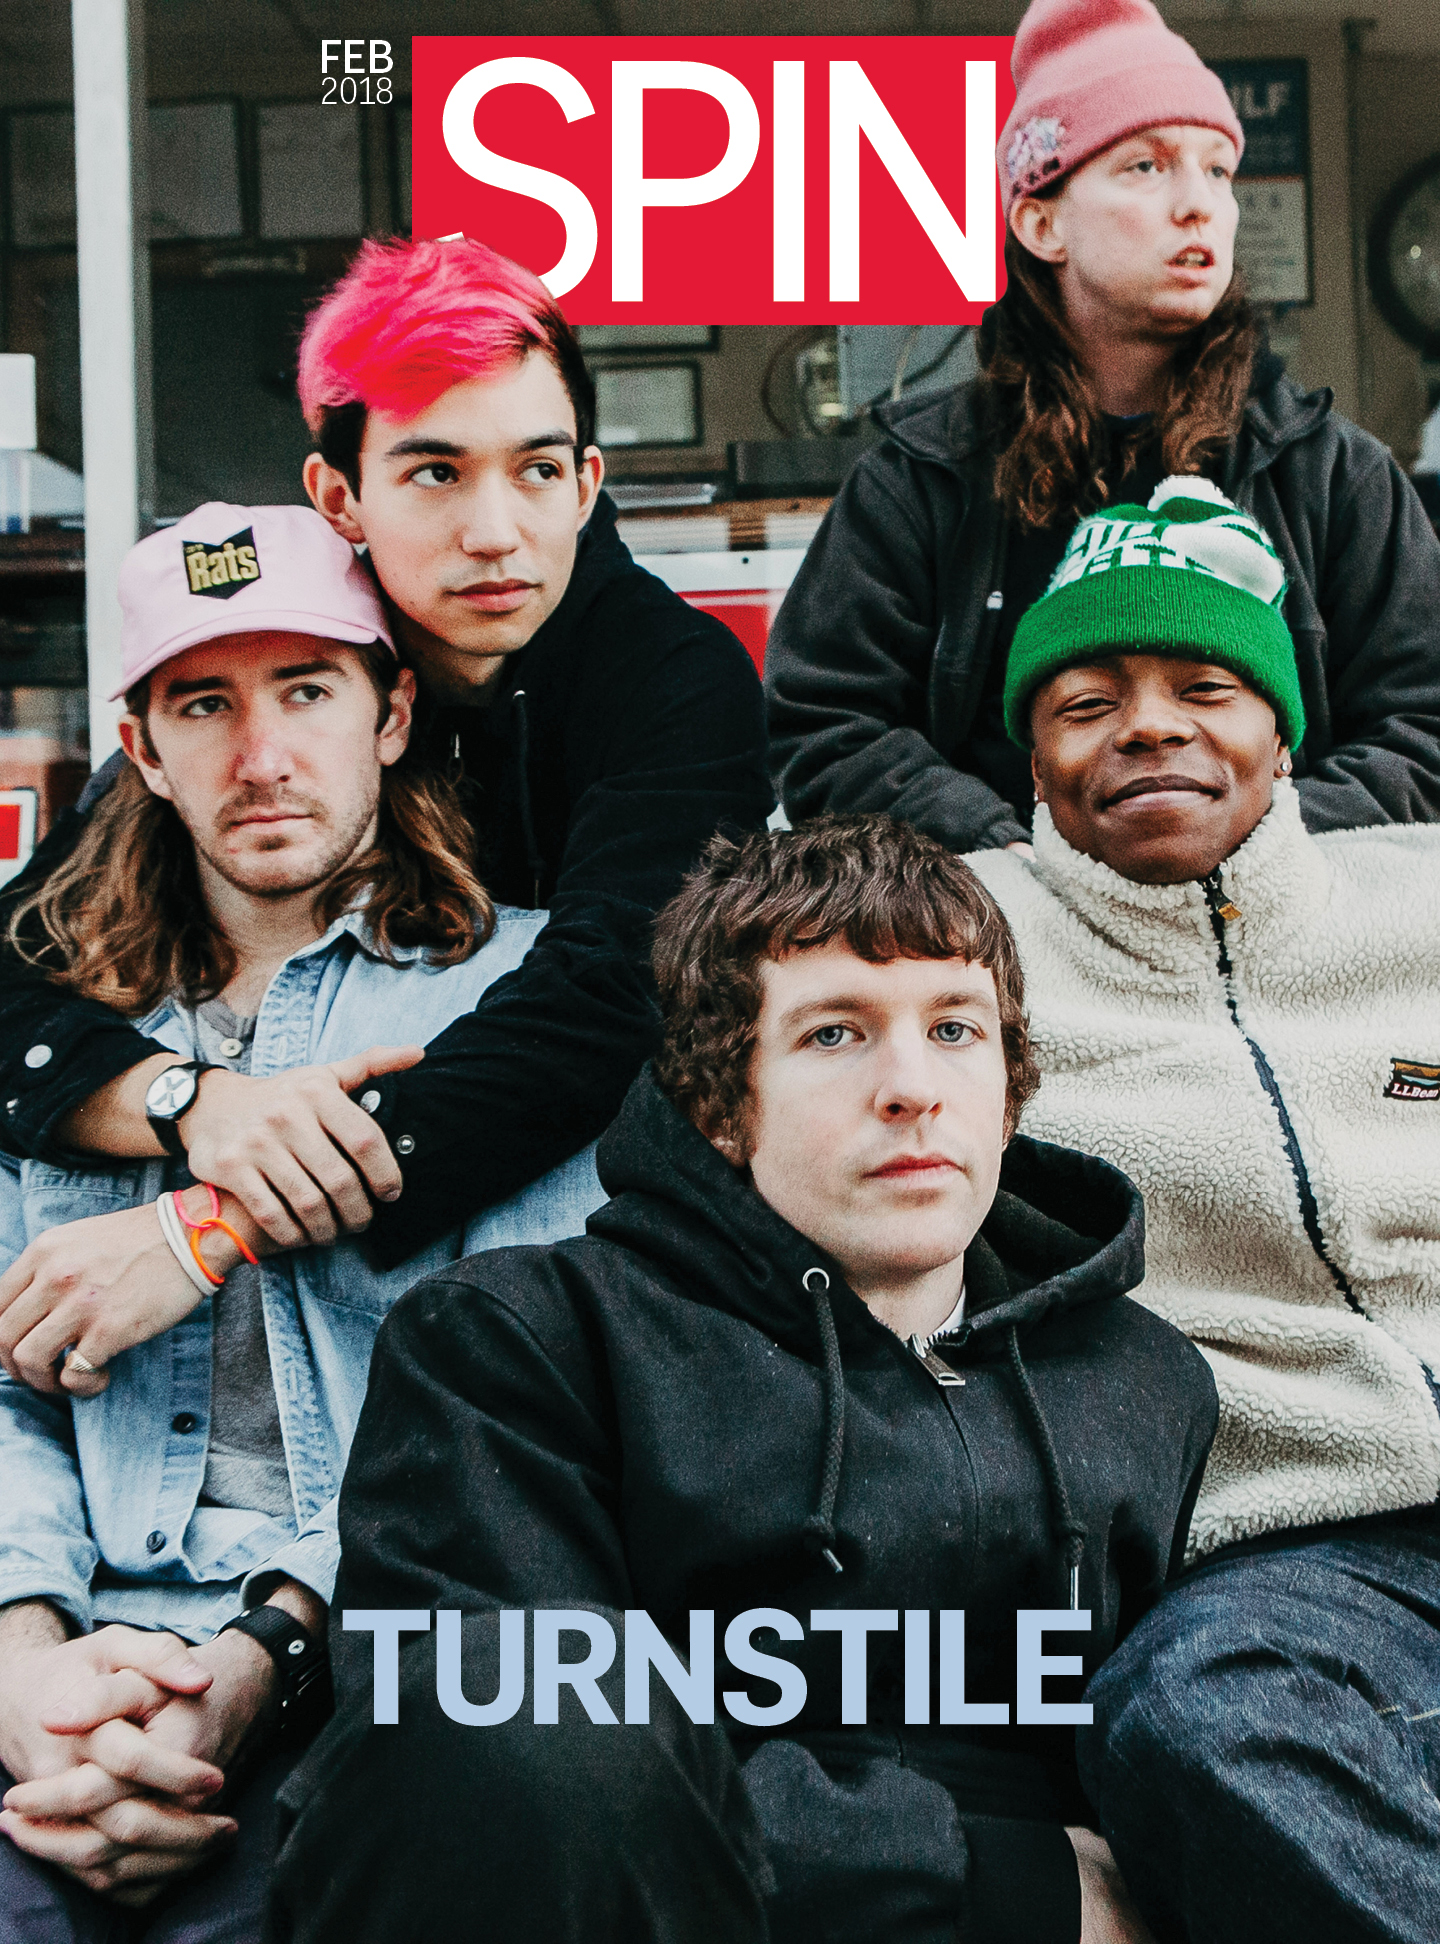 Turnstile Are the Real Thing